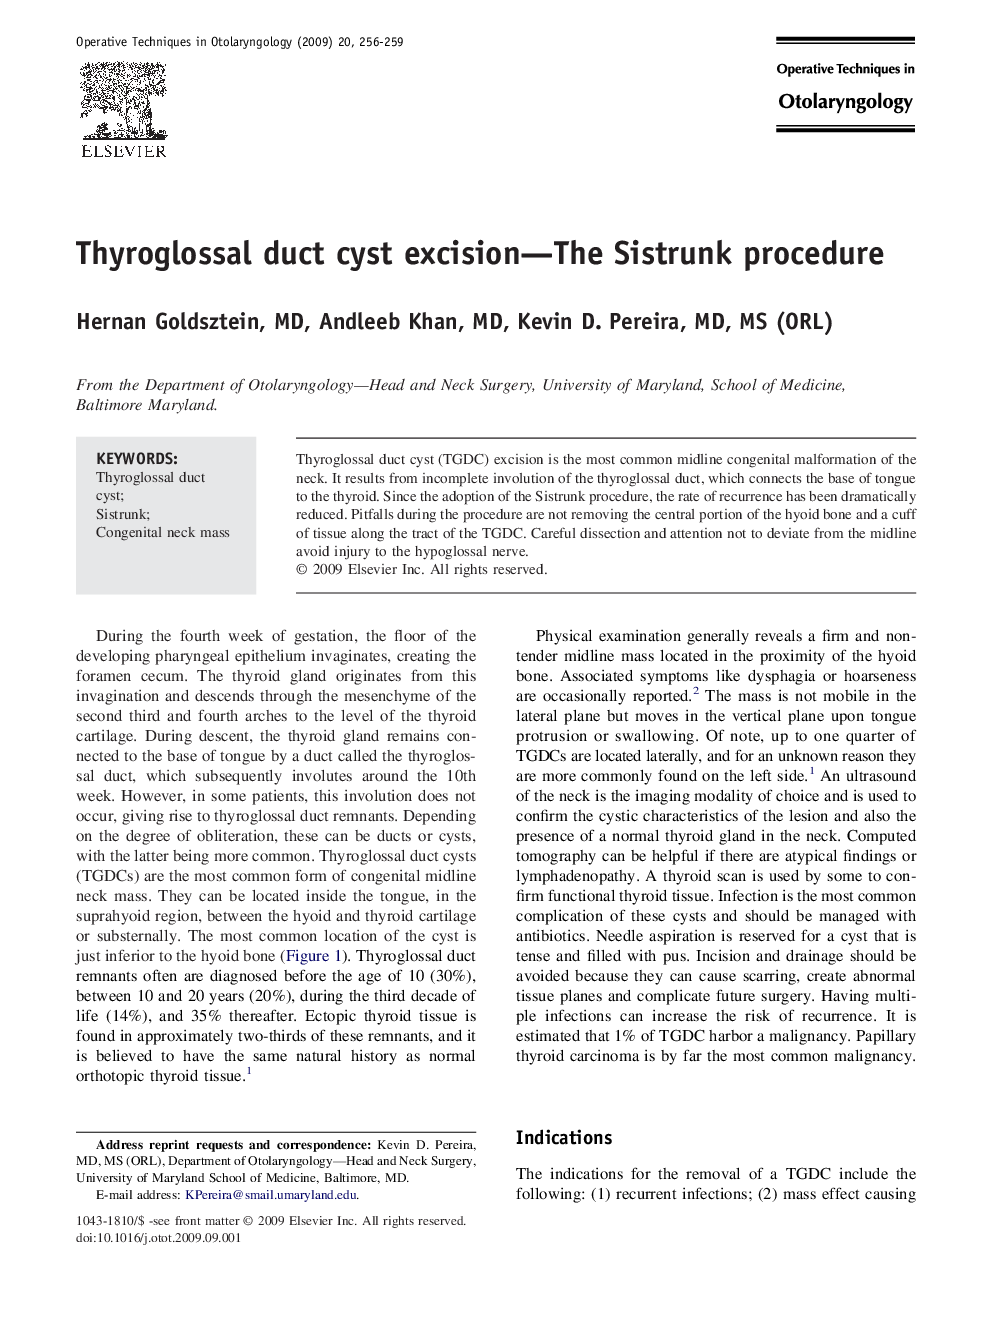 Thyroglossal duct cyst excision—The Sistrunk procedure